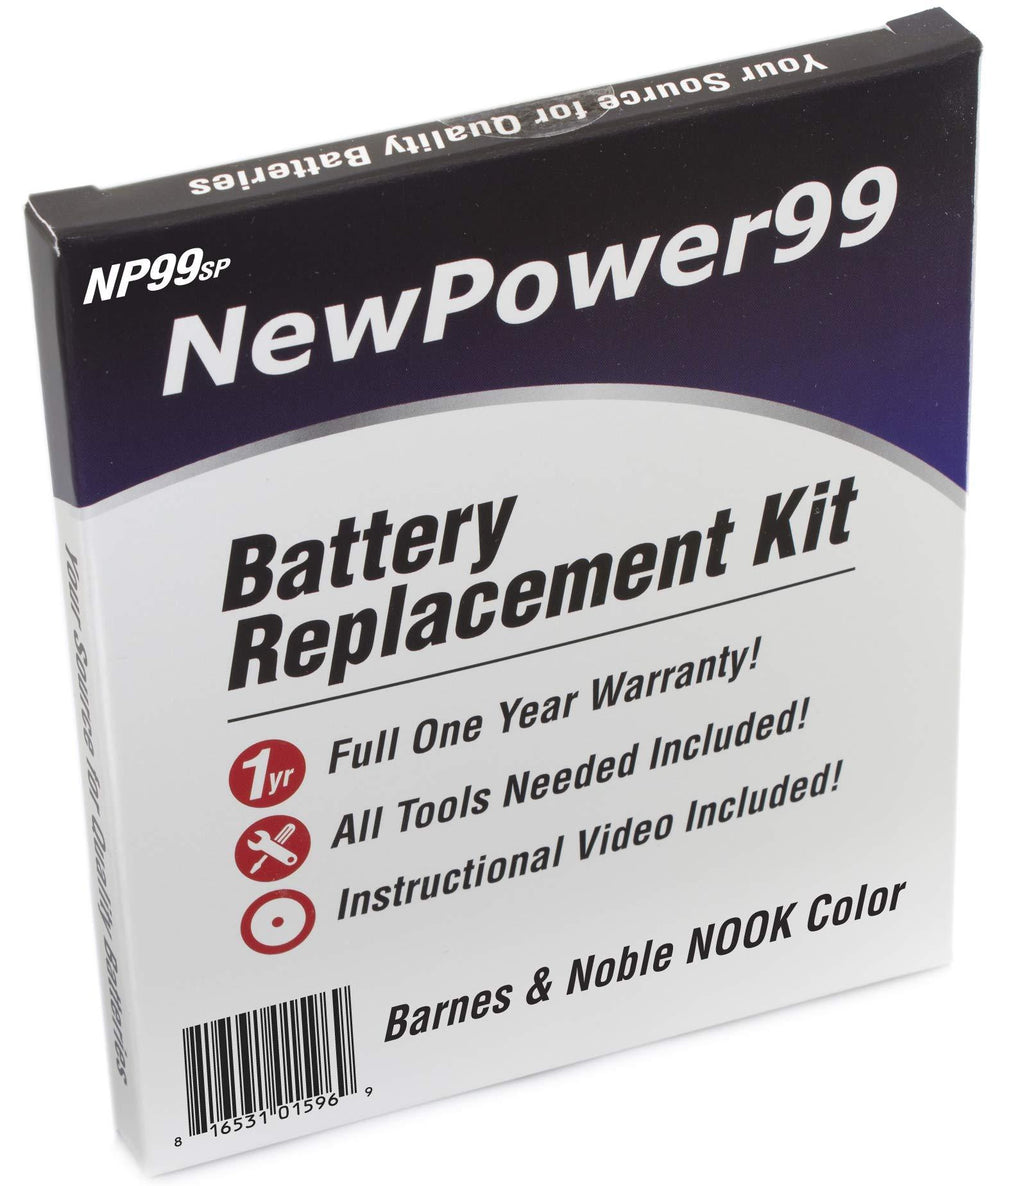  [AUSTRALIA] - Battery Kit for Barnes and Noble Nook Color with Tools, How-to Video and Long Life Battery from NewPower99